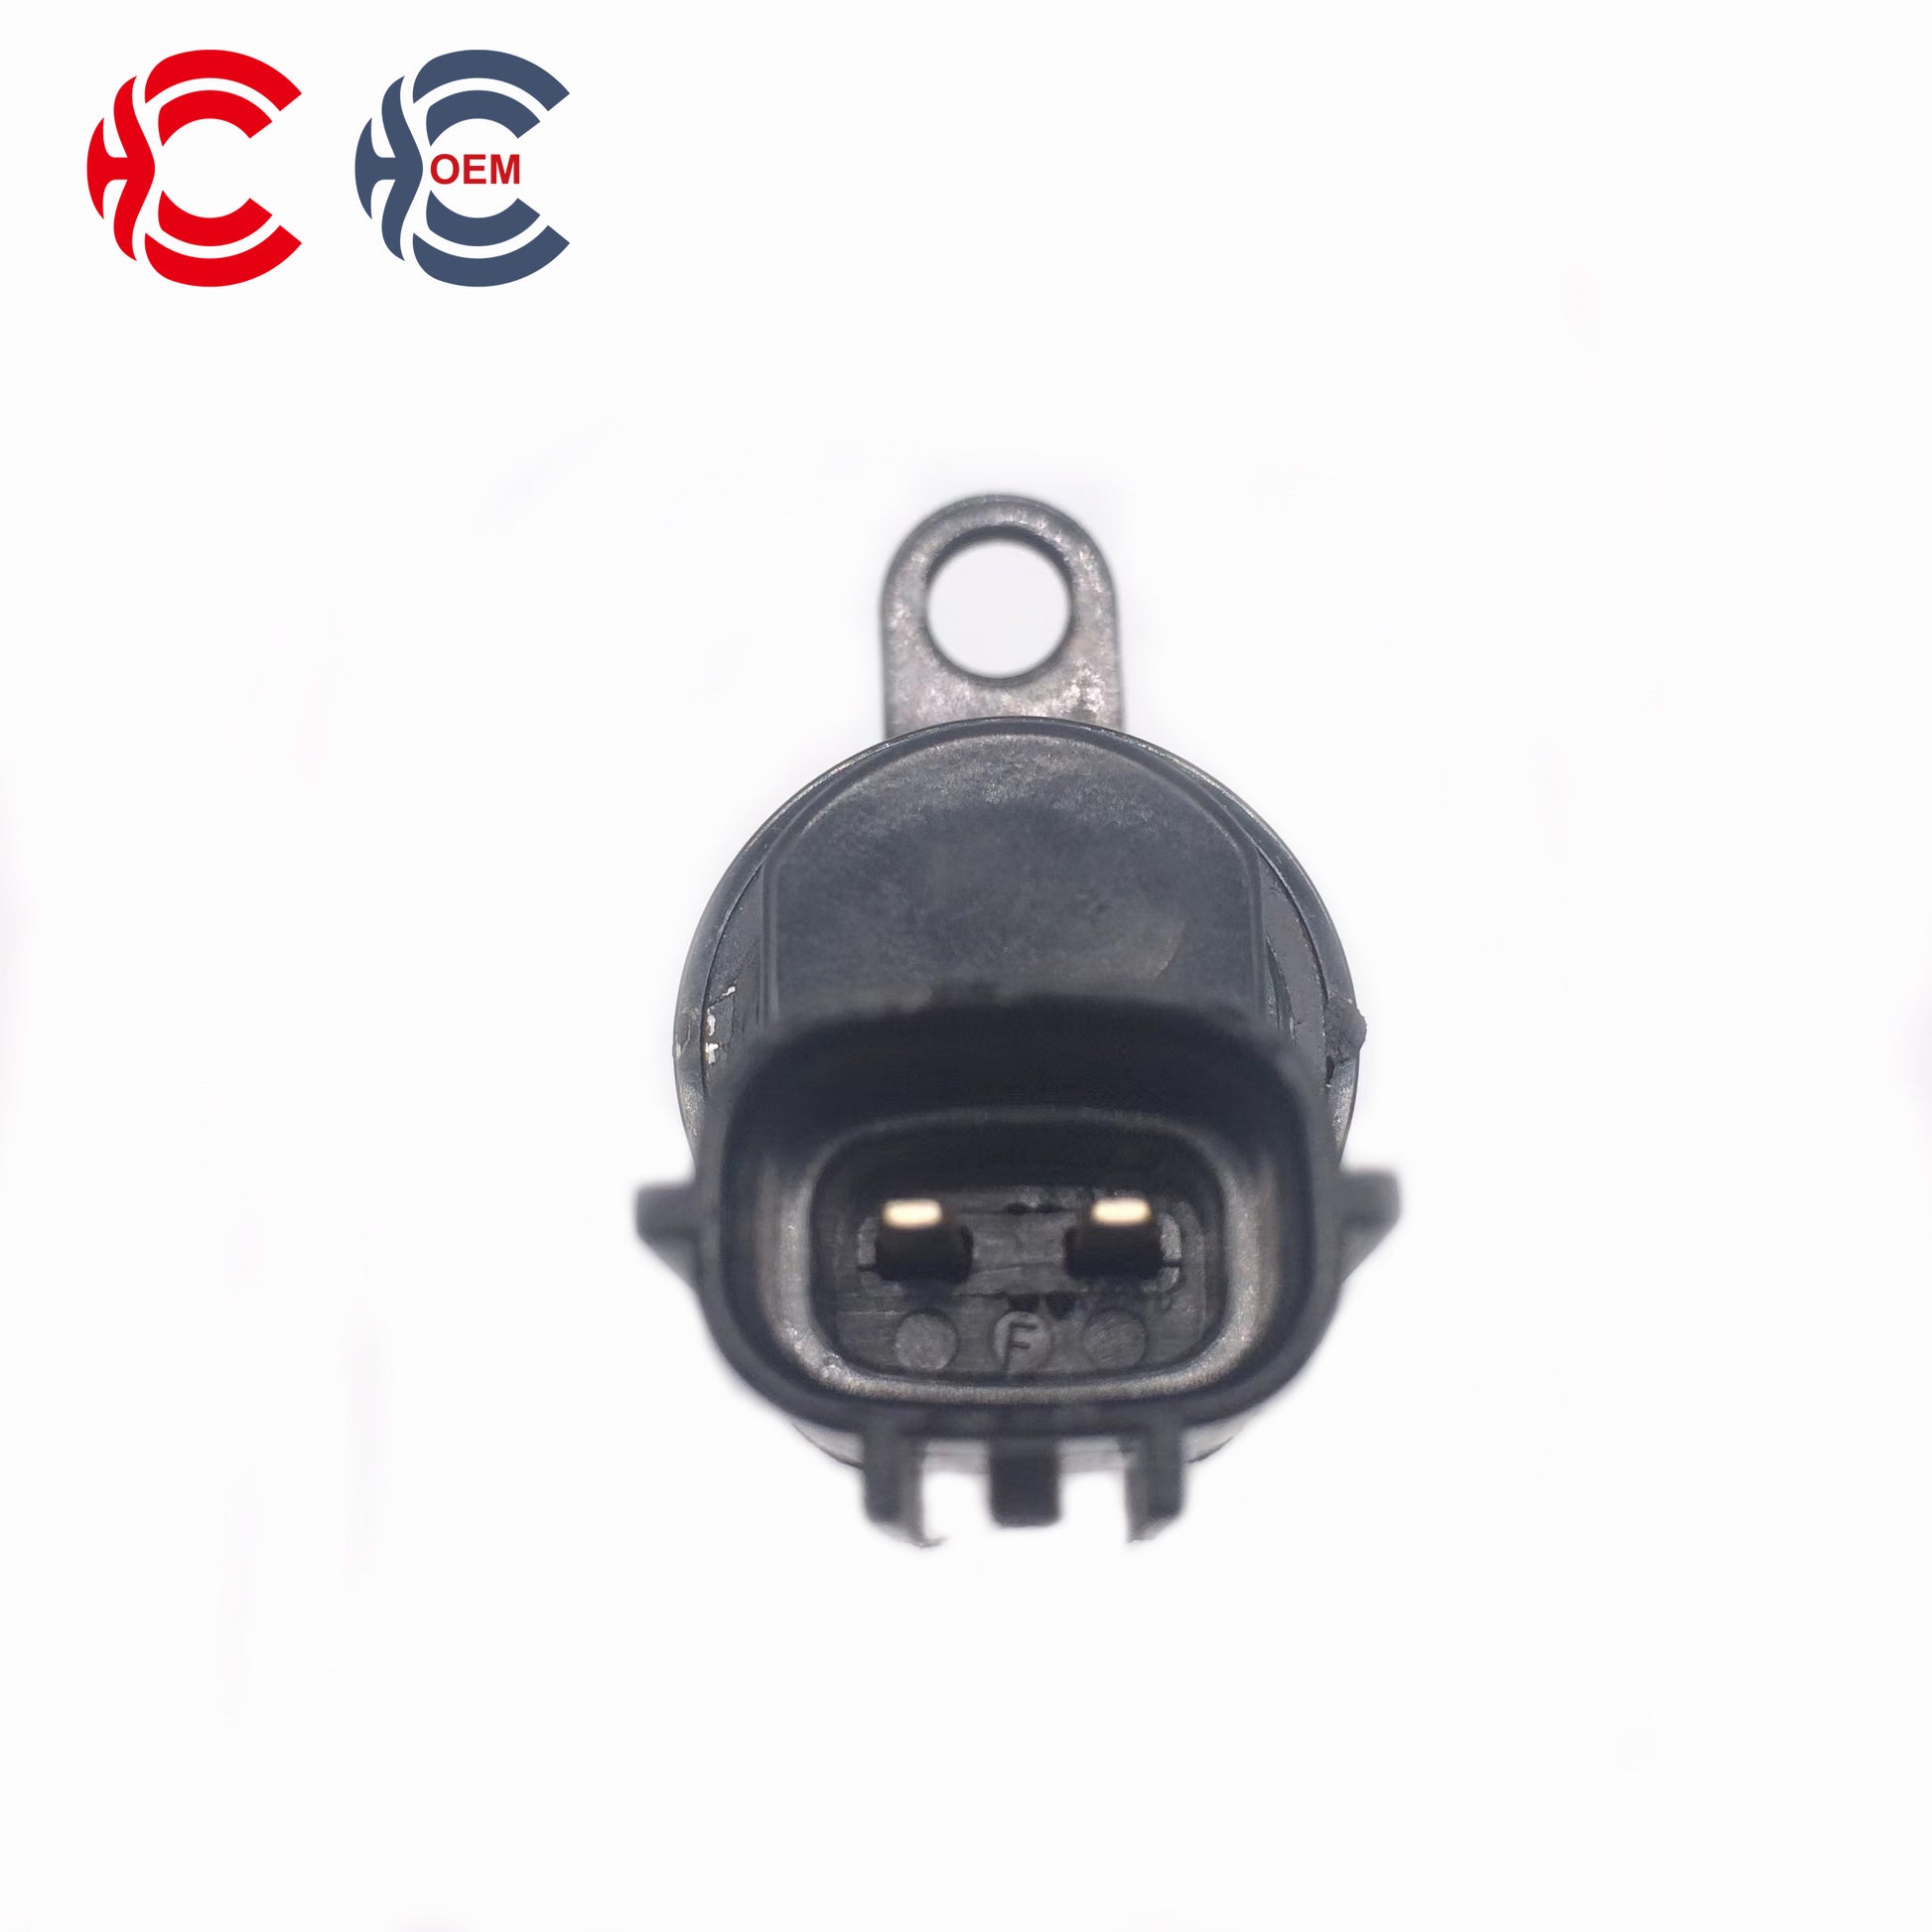 OEM: 15330-0C010Material: ABS metalColor: black silverOrigin: Made in ChinaWeight: 300gPacking List: 1* VVT Solenoid Valve More ServiceWe can provide OEM Manufacturing serviceWe can Be your one-step solution for Auto PartsWe can provide technical scheme for you Feel Free to Contact Us, We will get back to you as soon as possible.